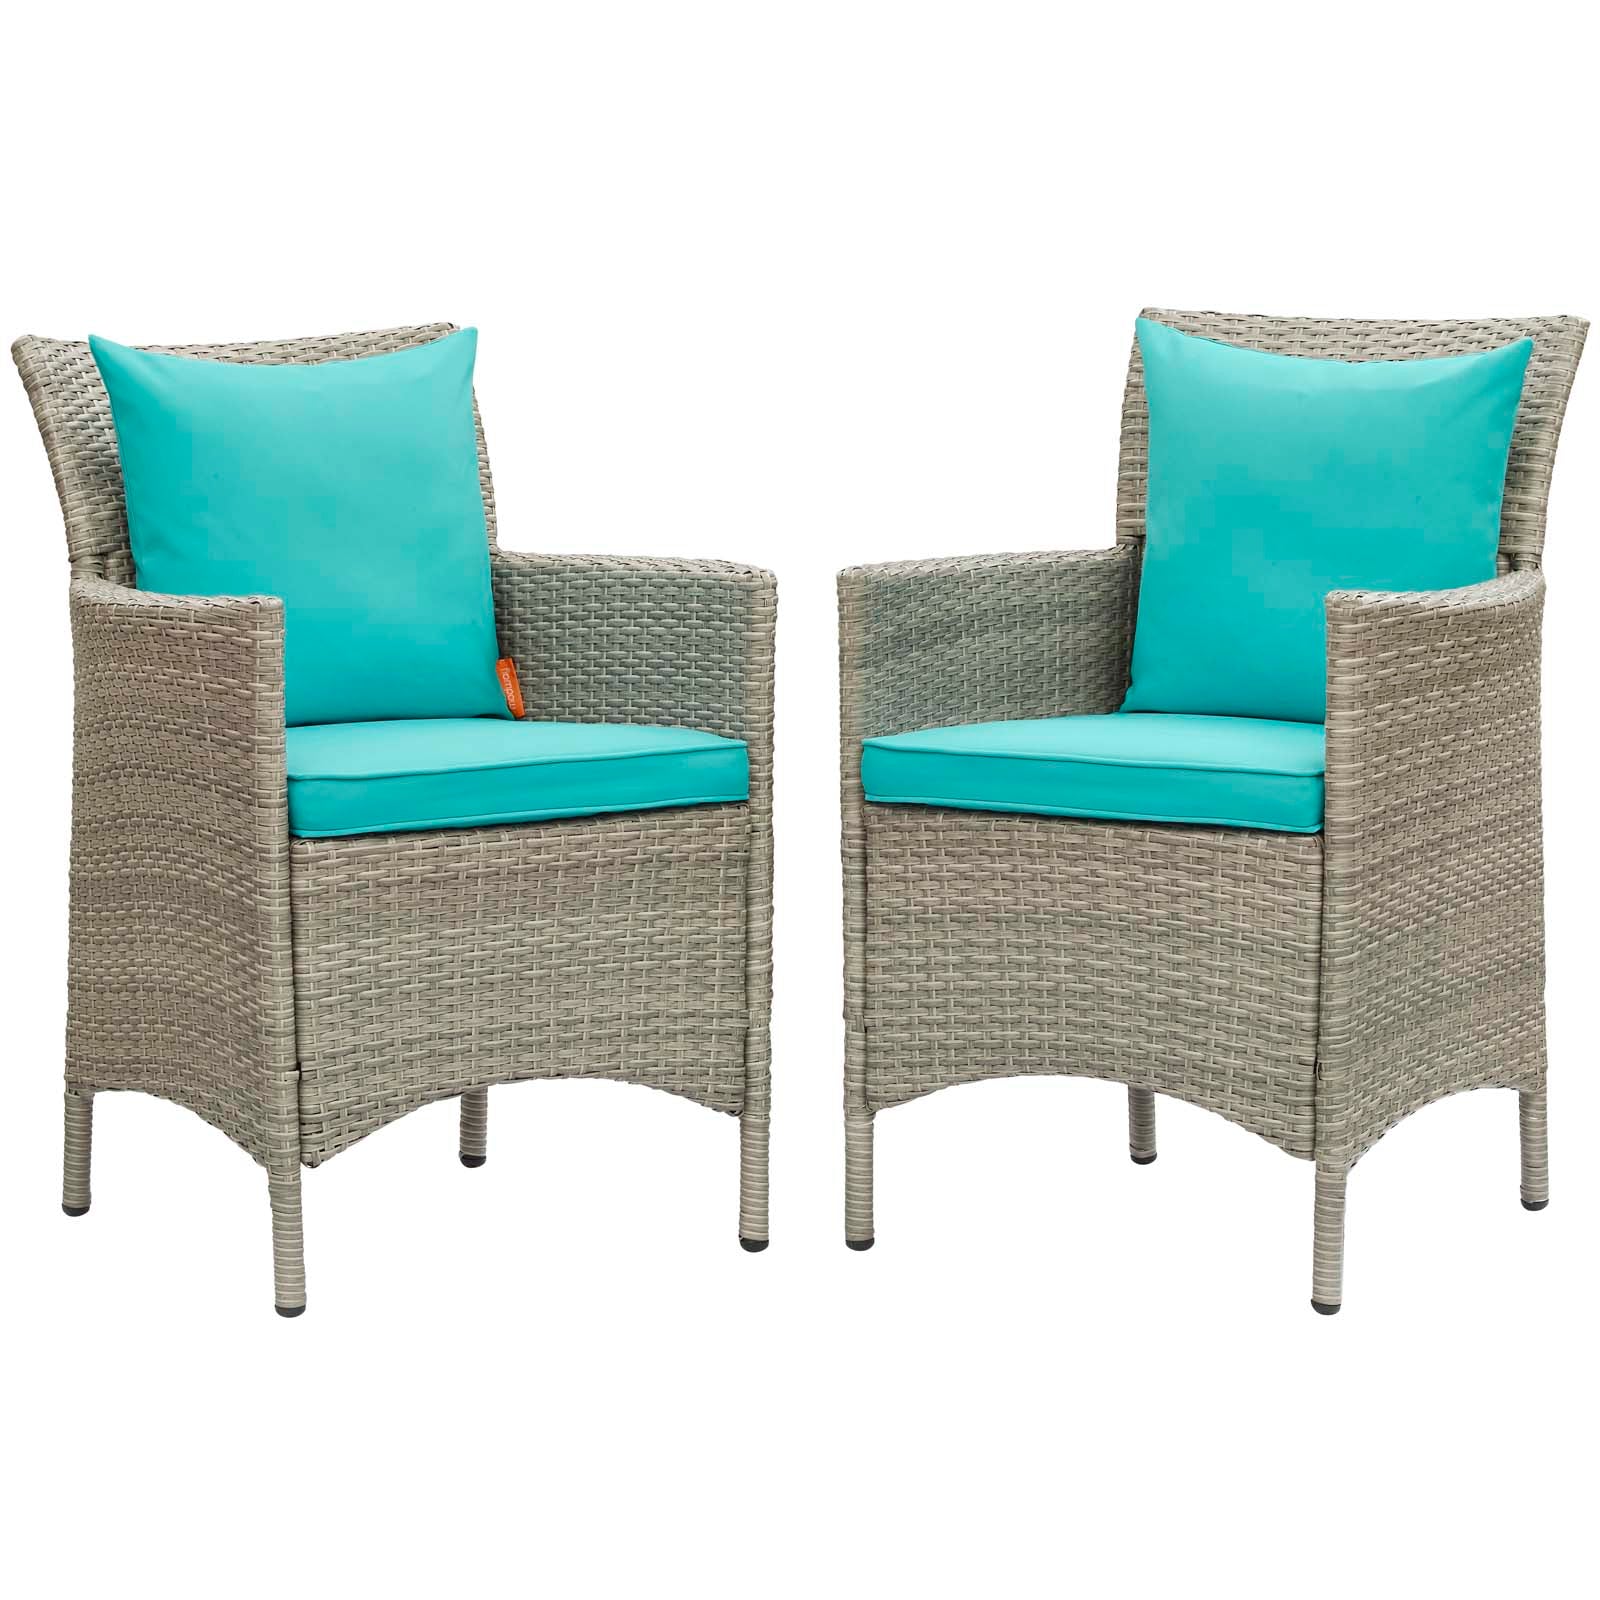 Modway Outdoor Dining Chairs - Conduit Outdoor Patio Wicker Rattan Dining Armchair Set of 2 Light Gray Turquoise